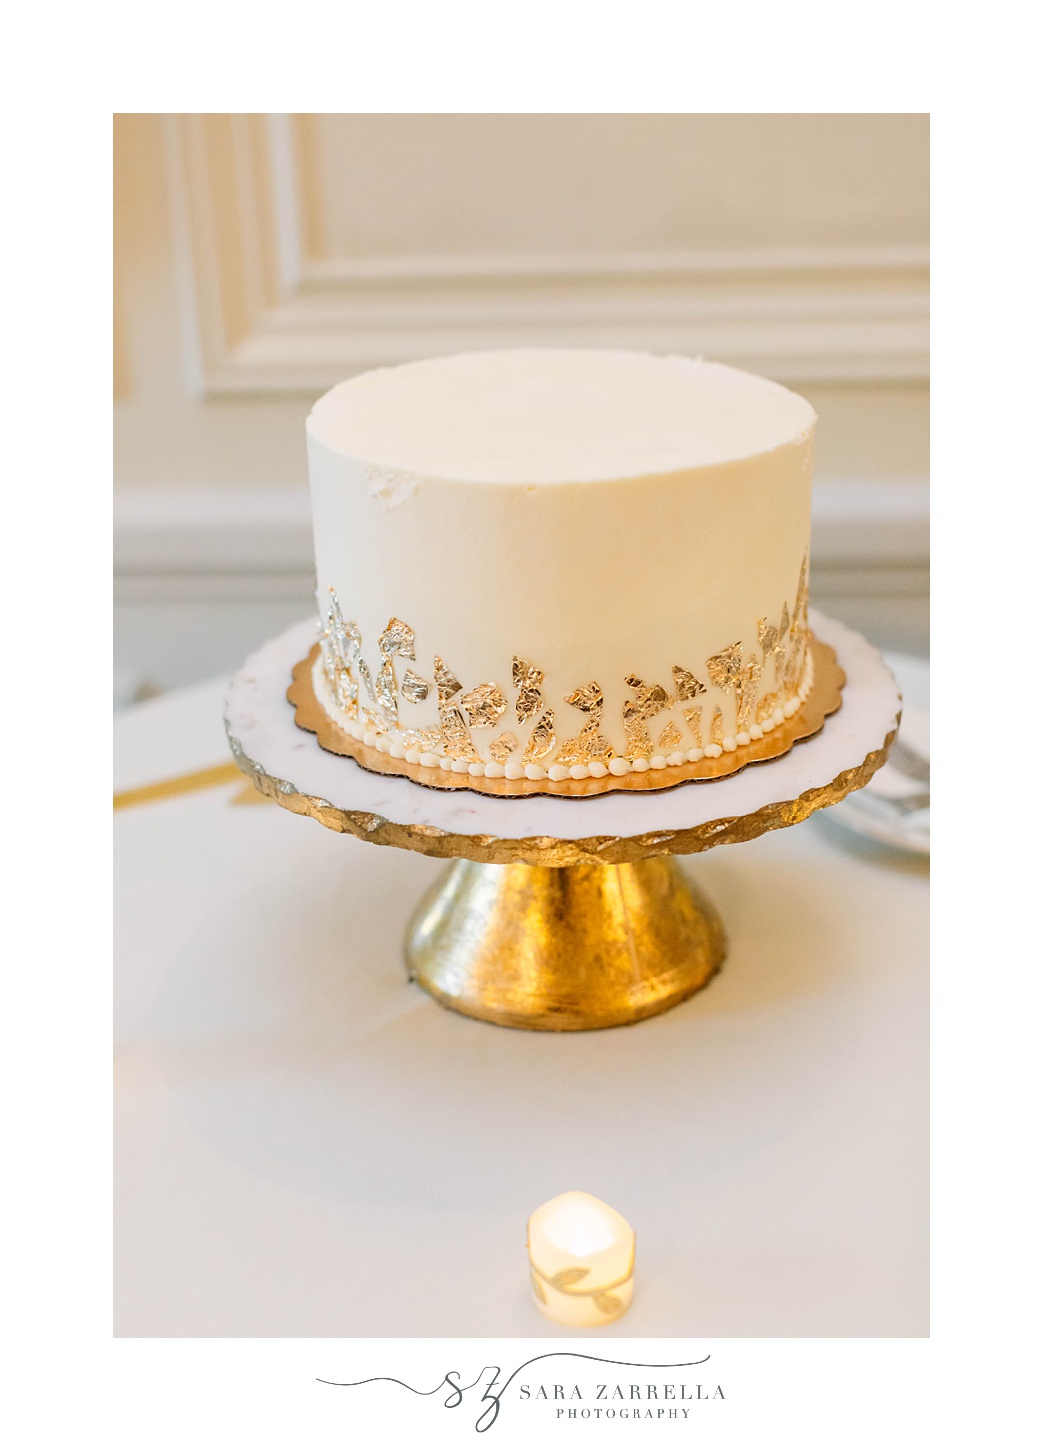 wedding cake on gold stand with gold edging 